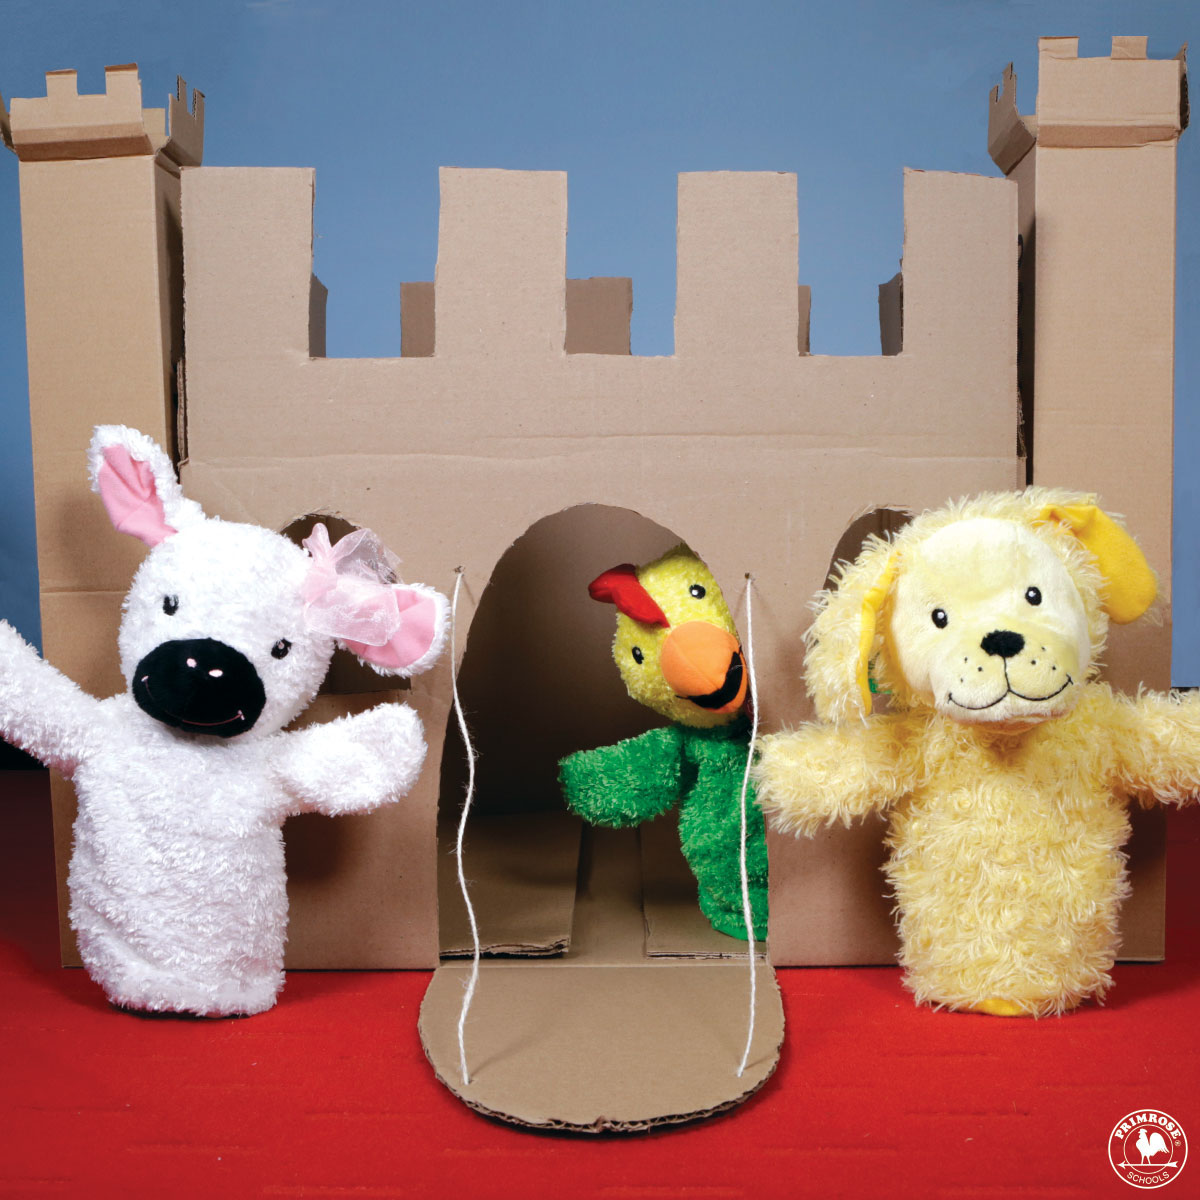 Primrose puppet Percy the chicken peeks out from a cardboard castle while Libby the lamb and Erwin the dog stand outside